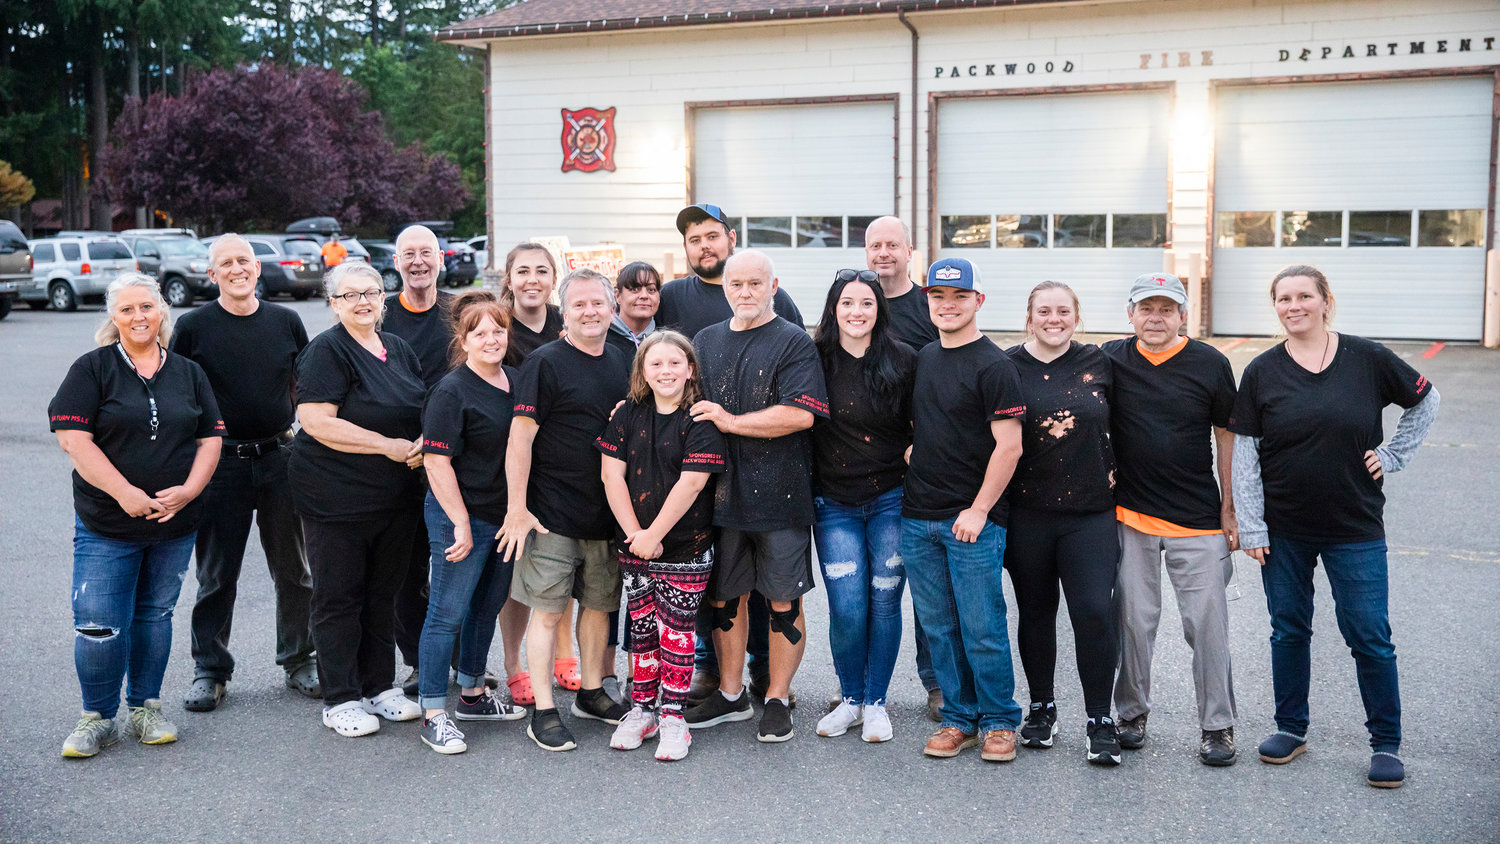 Lonnie Goble, friends, family and volunteers pose for a photo outside the Packwood Fire Department before a firework show Saturday evening.